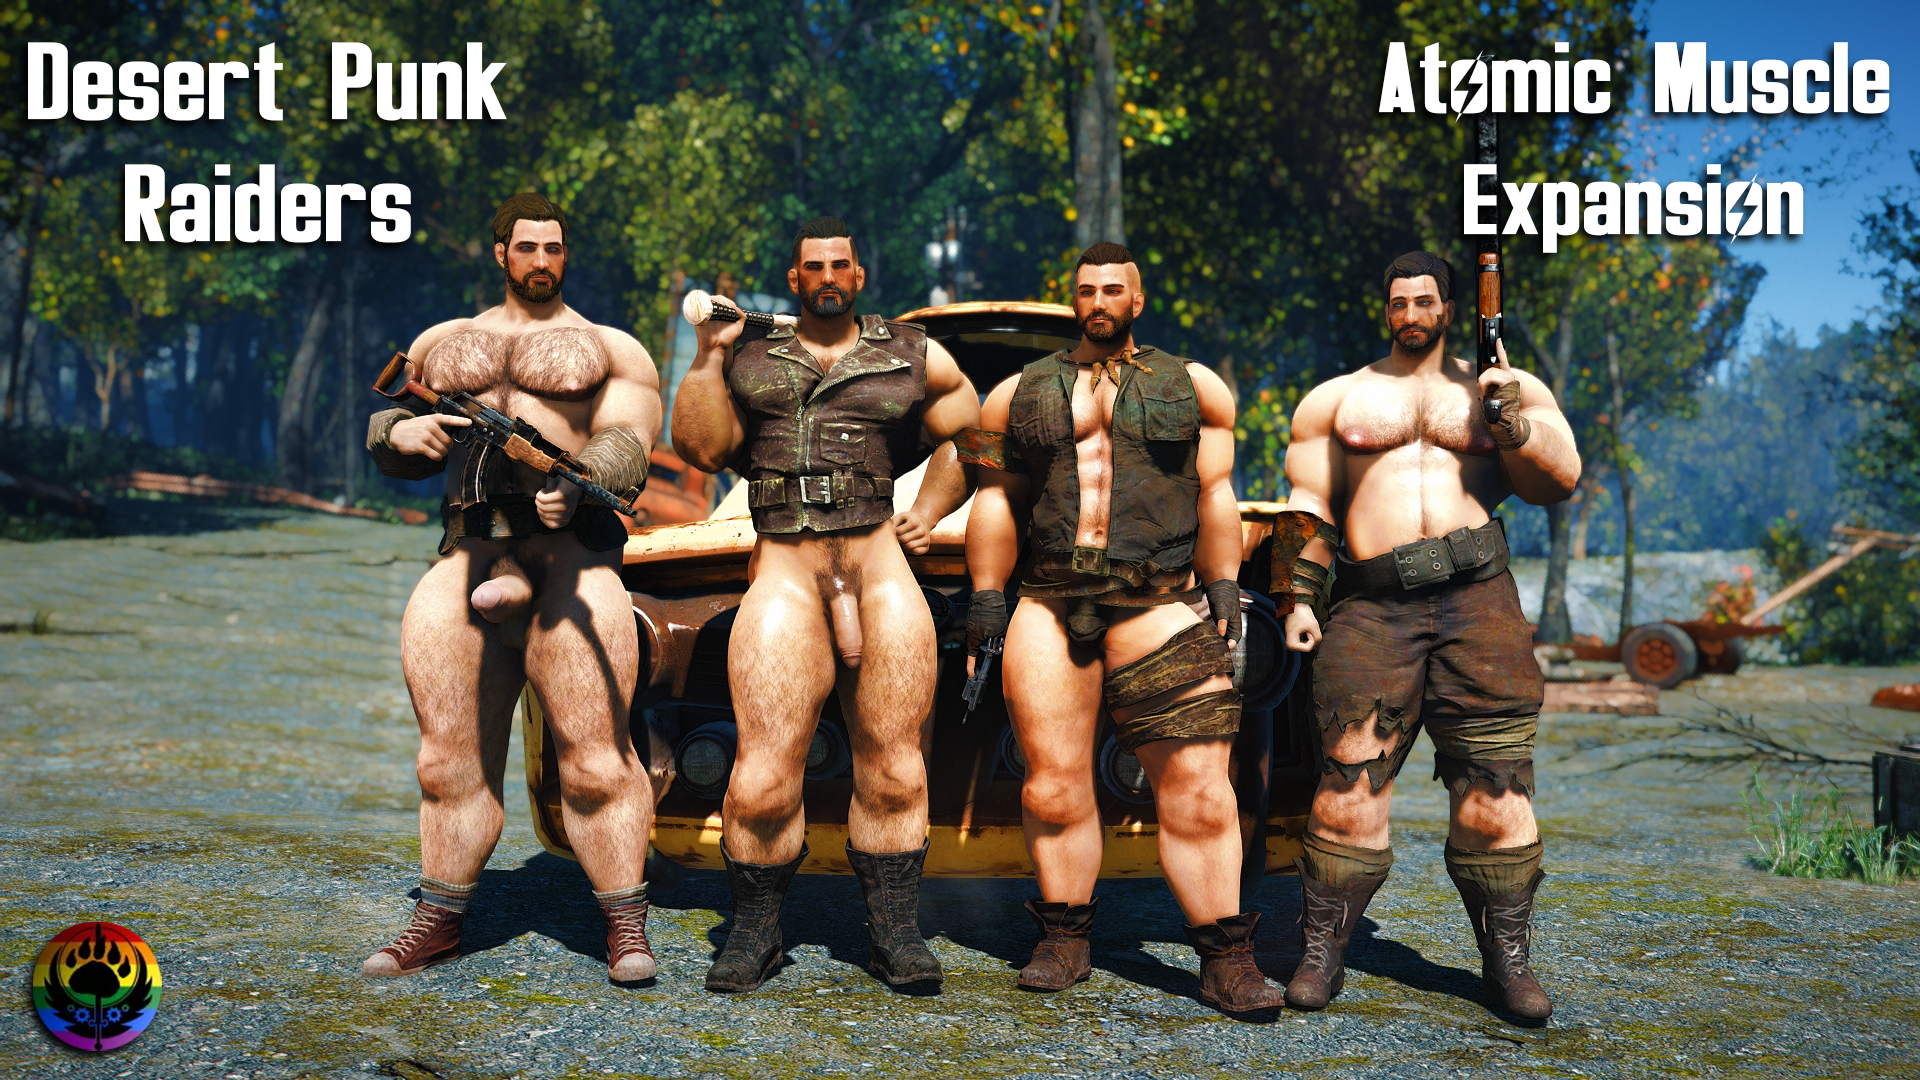 Desert Punk Raiders Atomic Muscle Expansion and Outfits Distribution